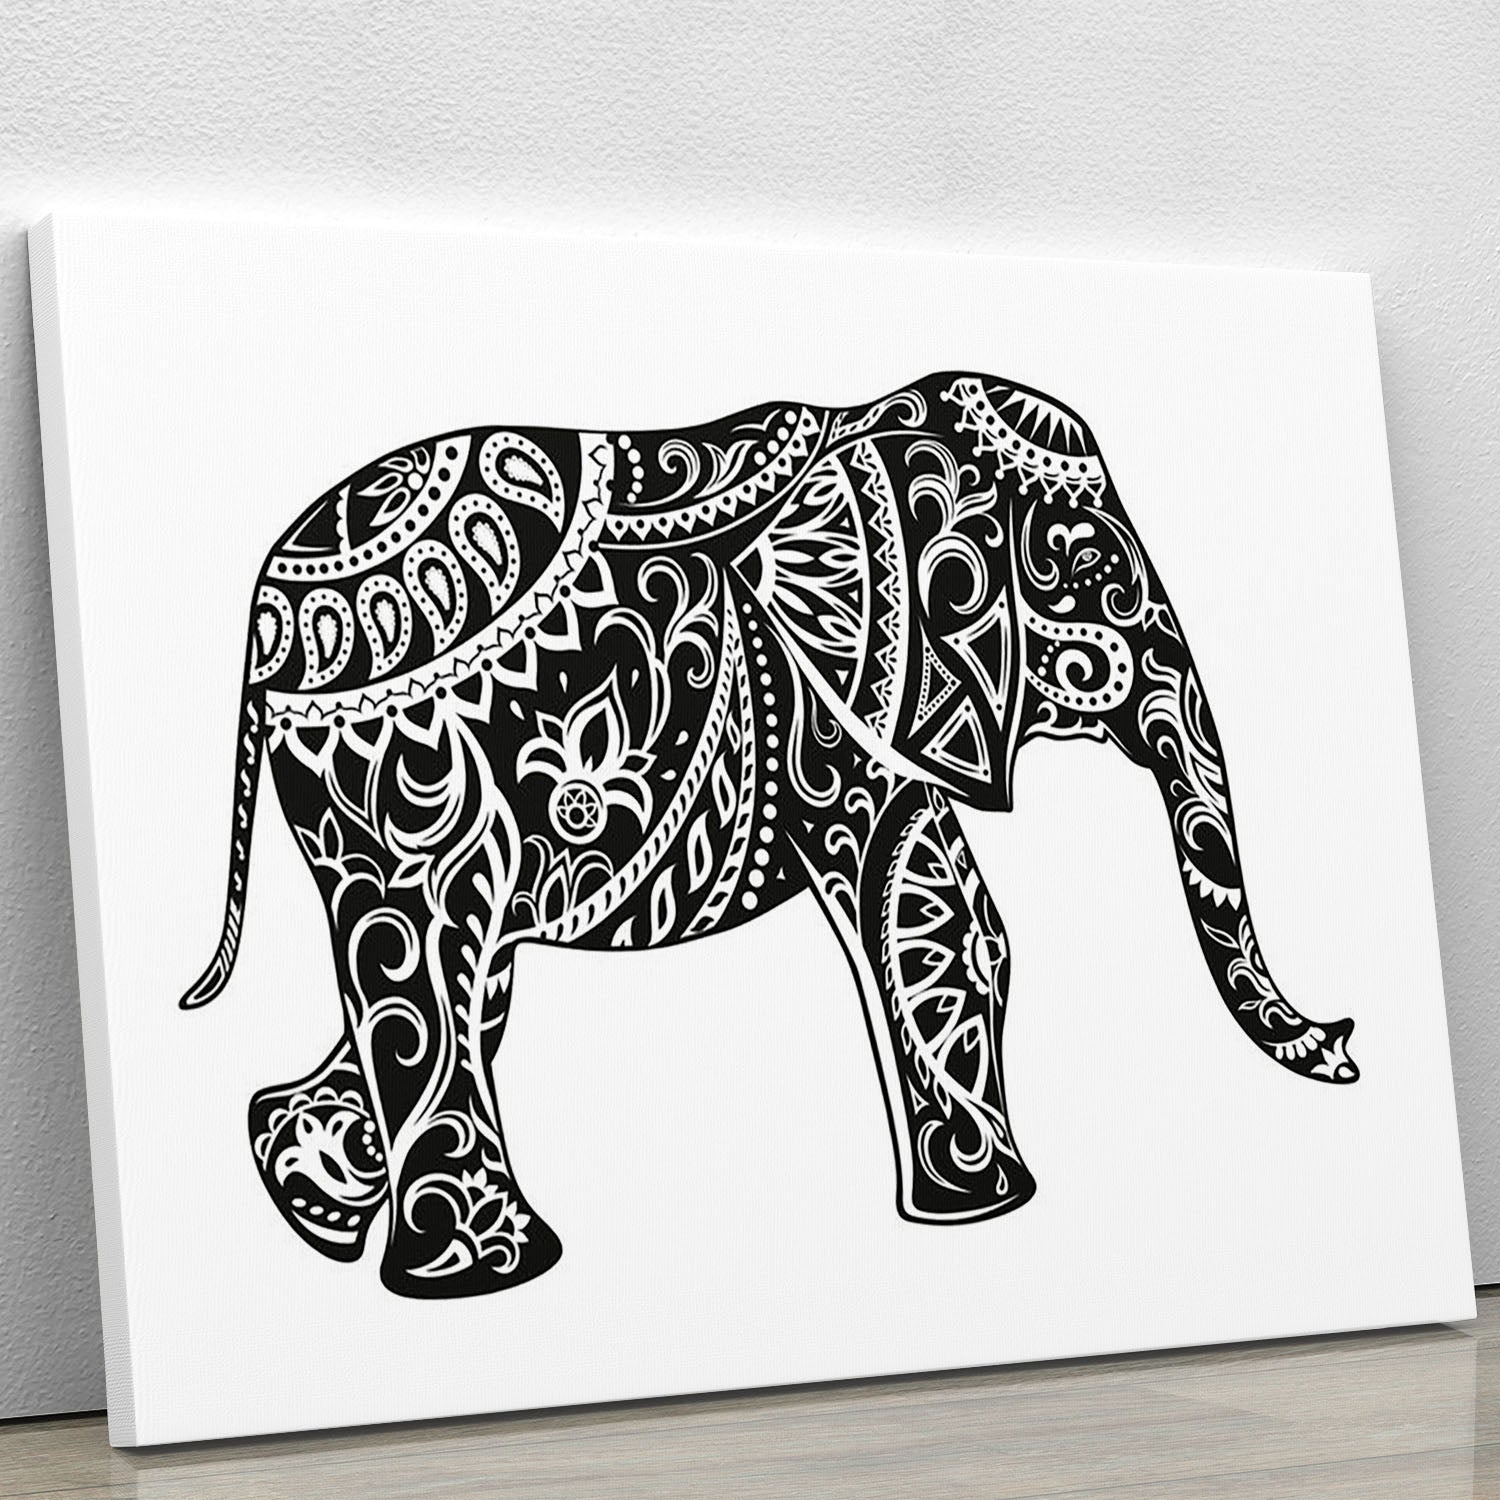 The stylized figure of an elephant in the festive patterns Canvas Print or Poster - Canvas Art Rocks - 1